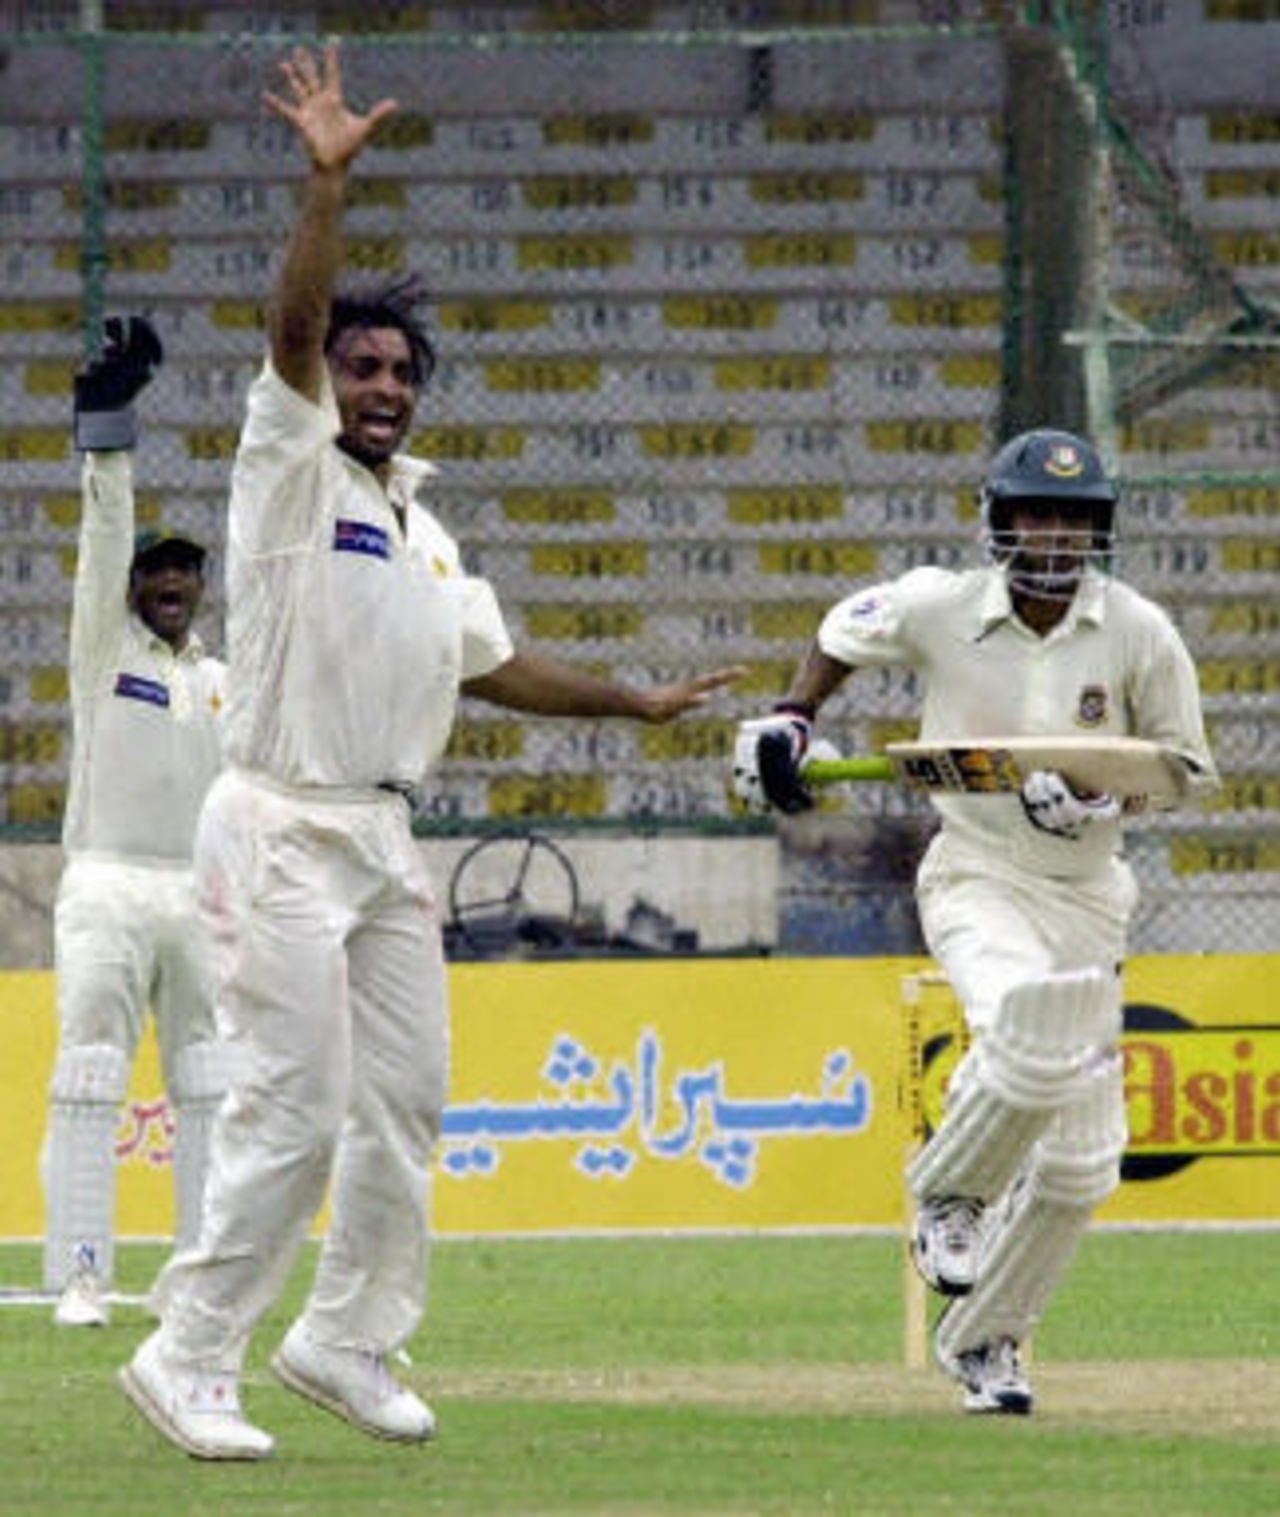 Shoaib Akhtar successfully appeals for an LBW decission against Bangladeshi batsman Sanwar Hossain as Rashid Latif joins the appeal on the first day of the opening Test in Karachi, 20 August 2003.